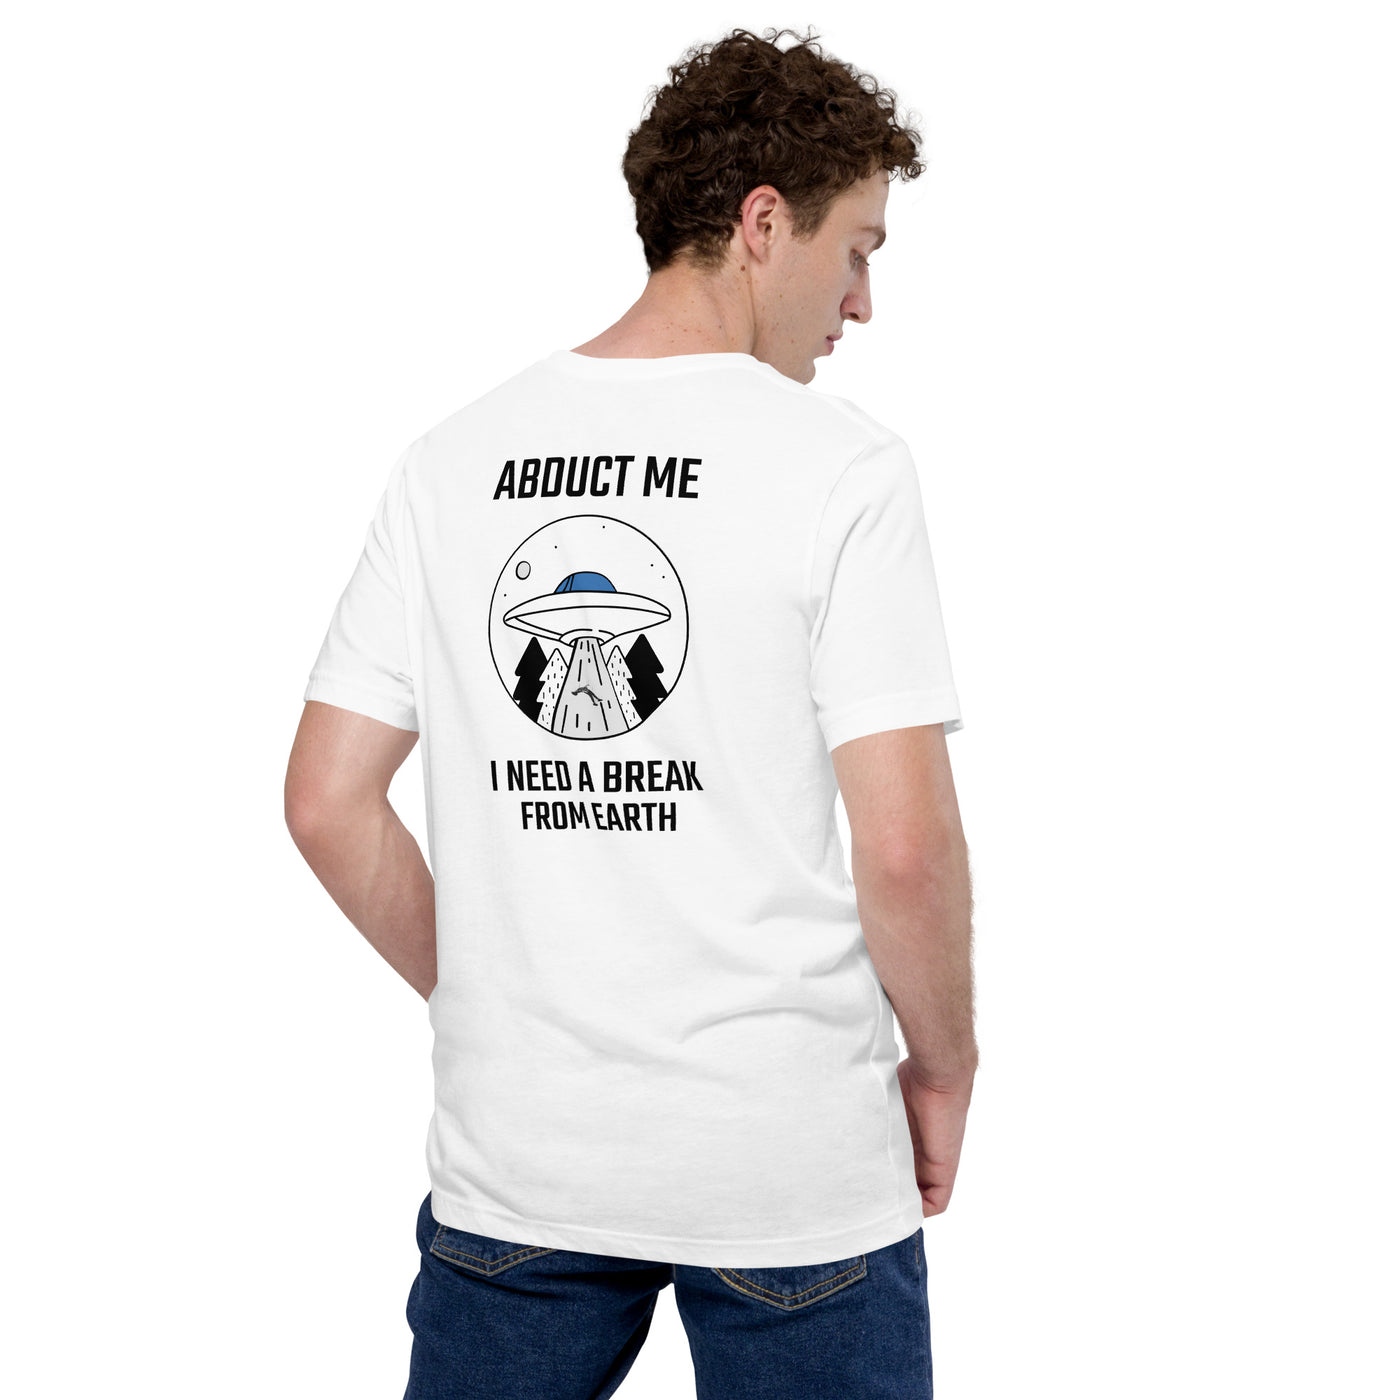 Abduct me I need a break from Earth - Unisex t-shirt (back print)